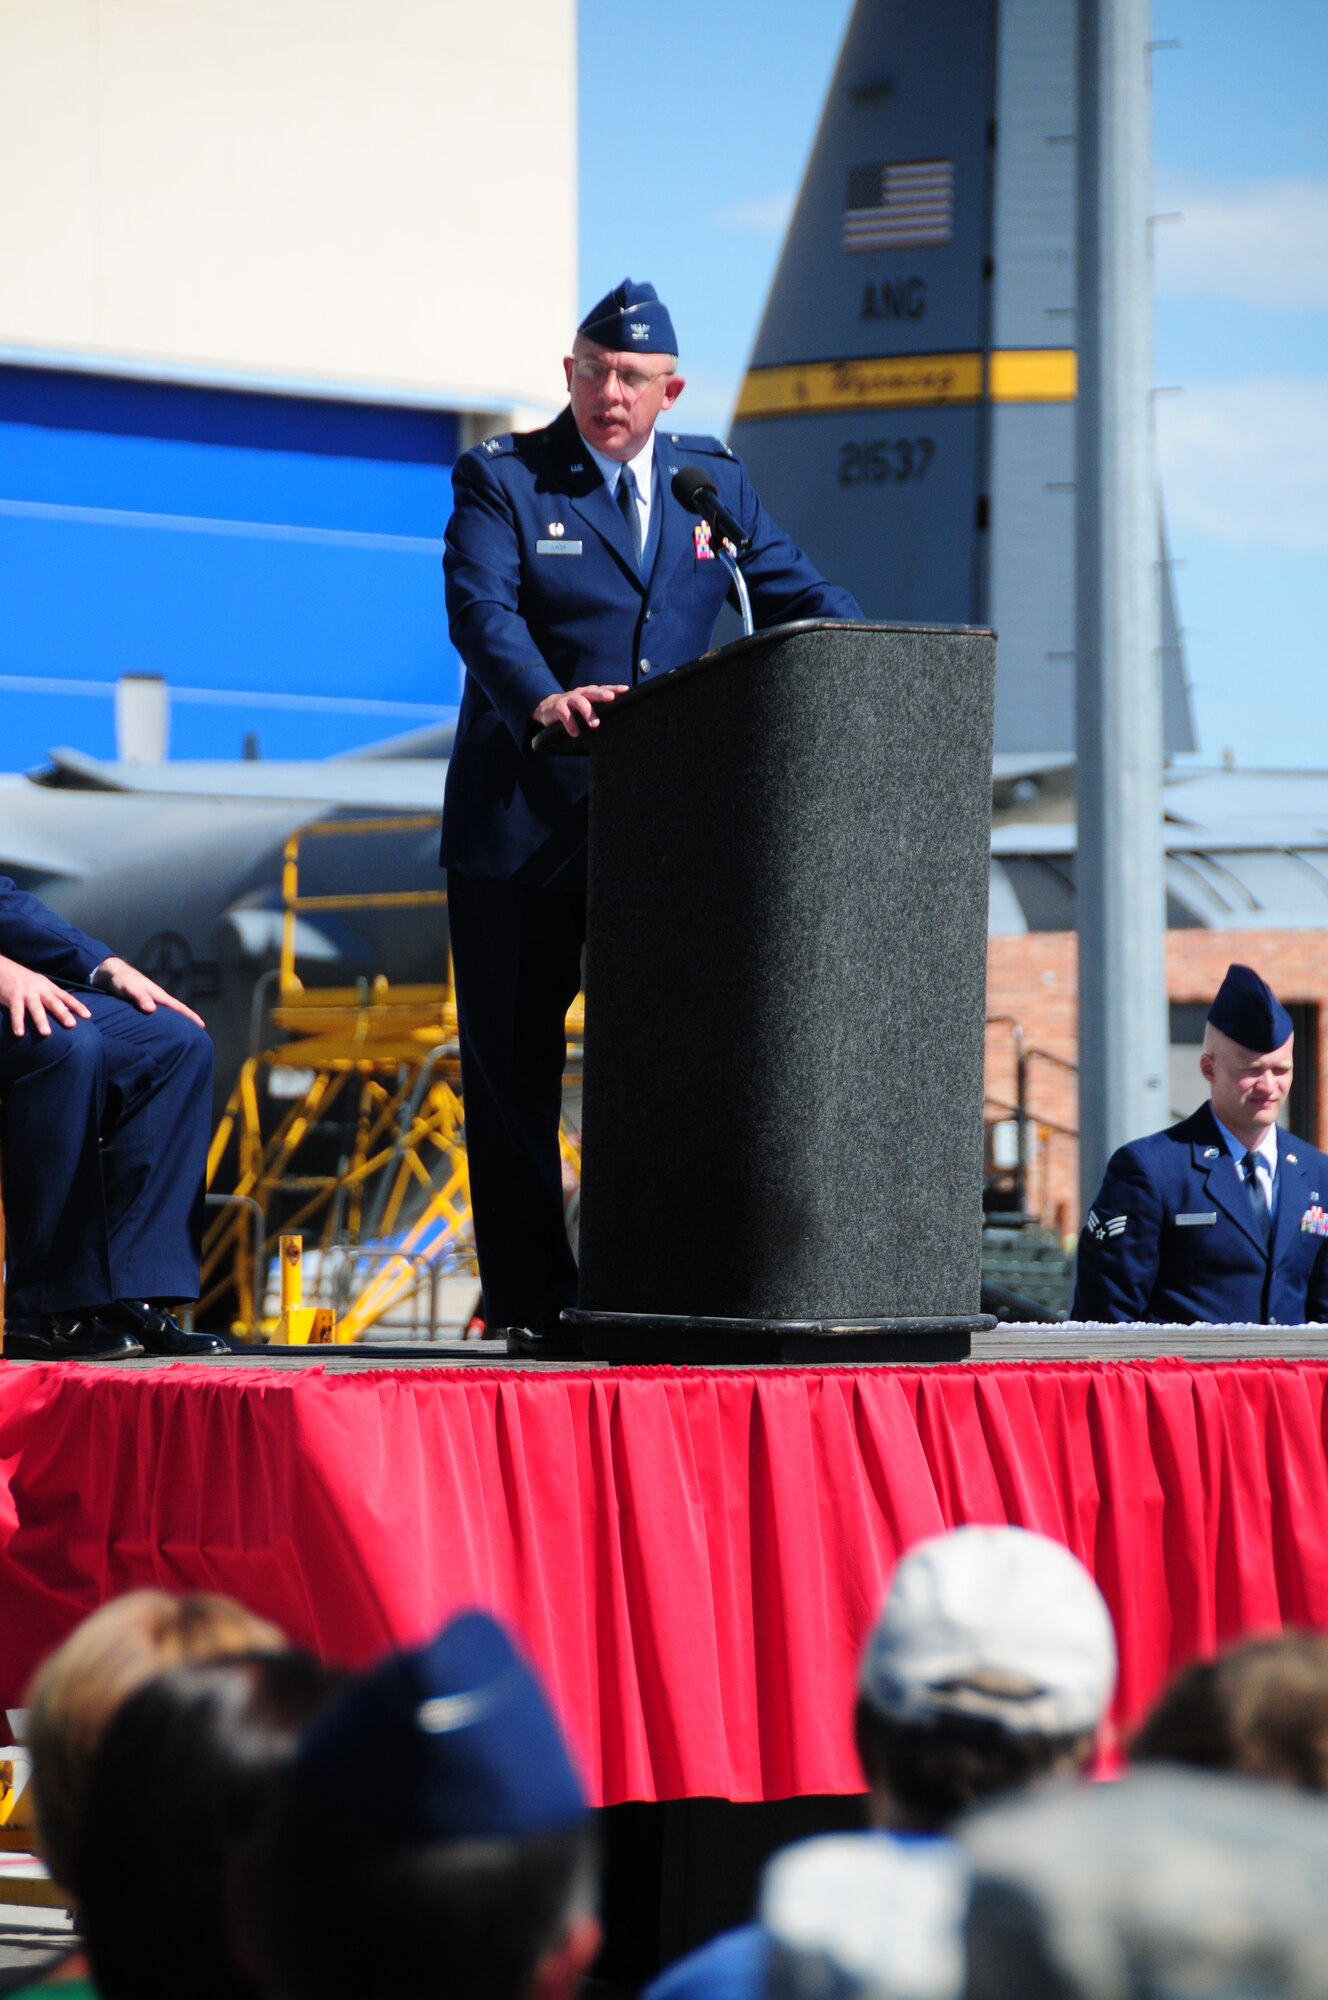 Col. Peter L. "Pete" Linde, 153rd Maintenance Group commander, addresses a gathered audience for the 153rd Mission Support Group change of command ceremony Aug. 4, 2013 at the Wyoming Air National Guard Base, Cheyenne, Wyo. Linde assumed command after .  (U.S. Air National Guard photo by Capt. Rusty Ridley)